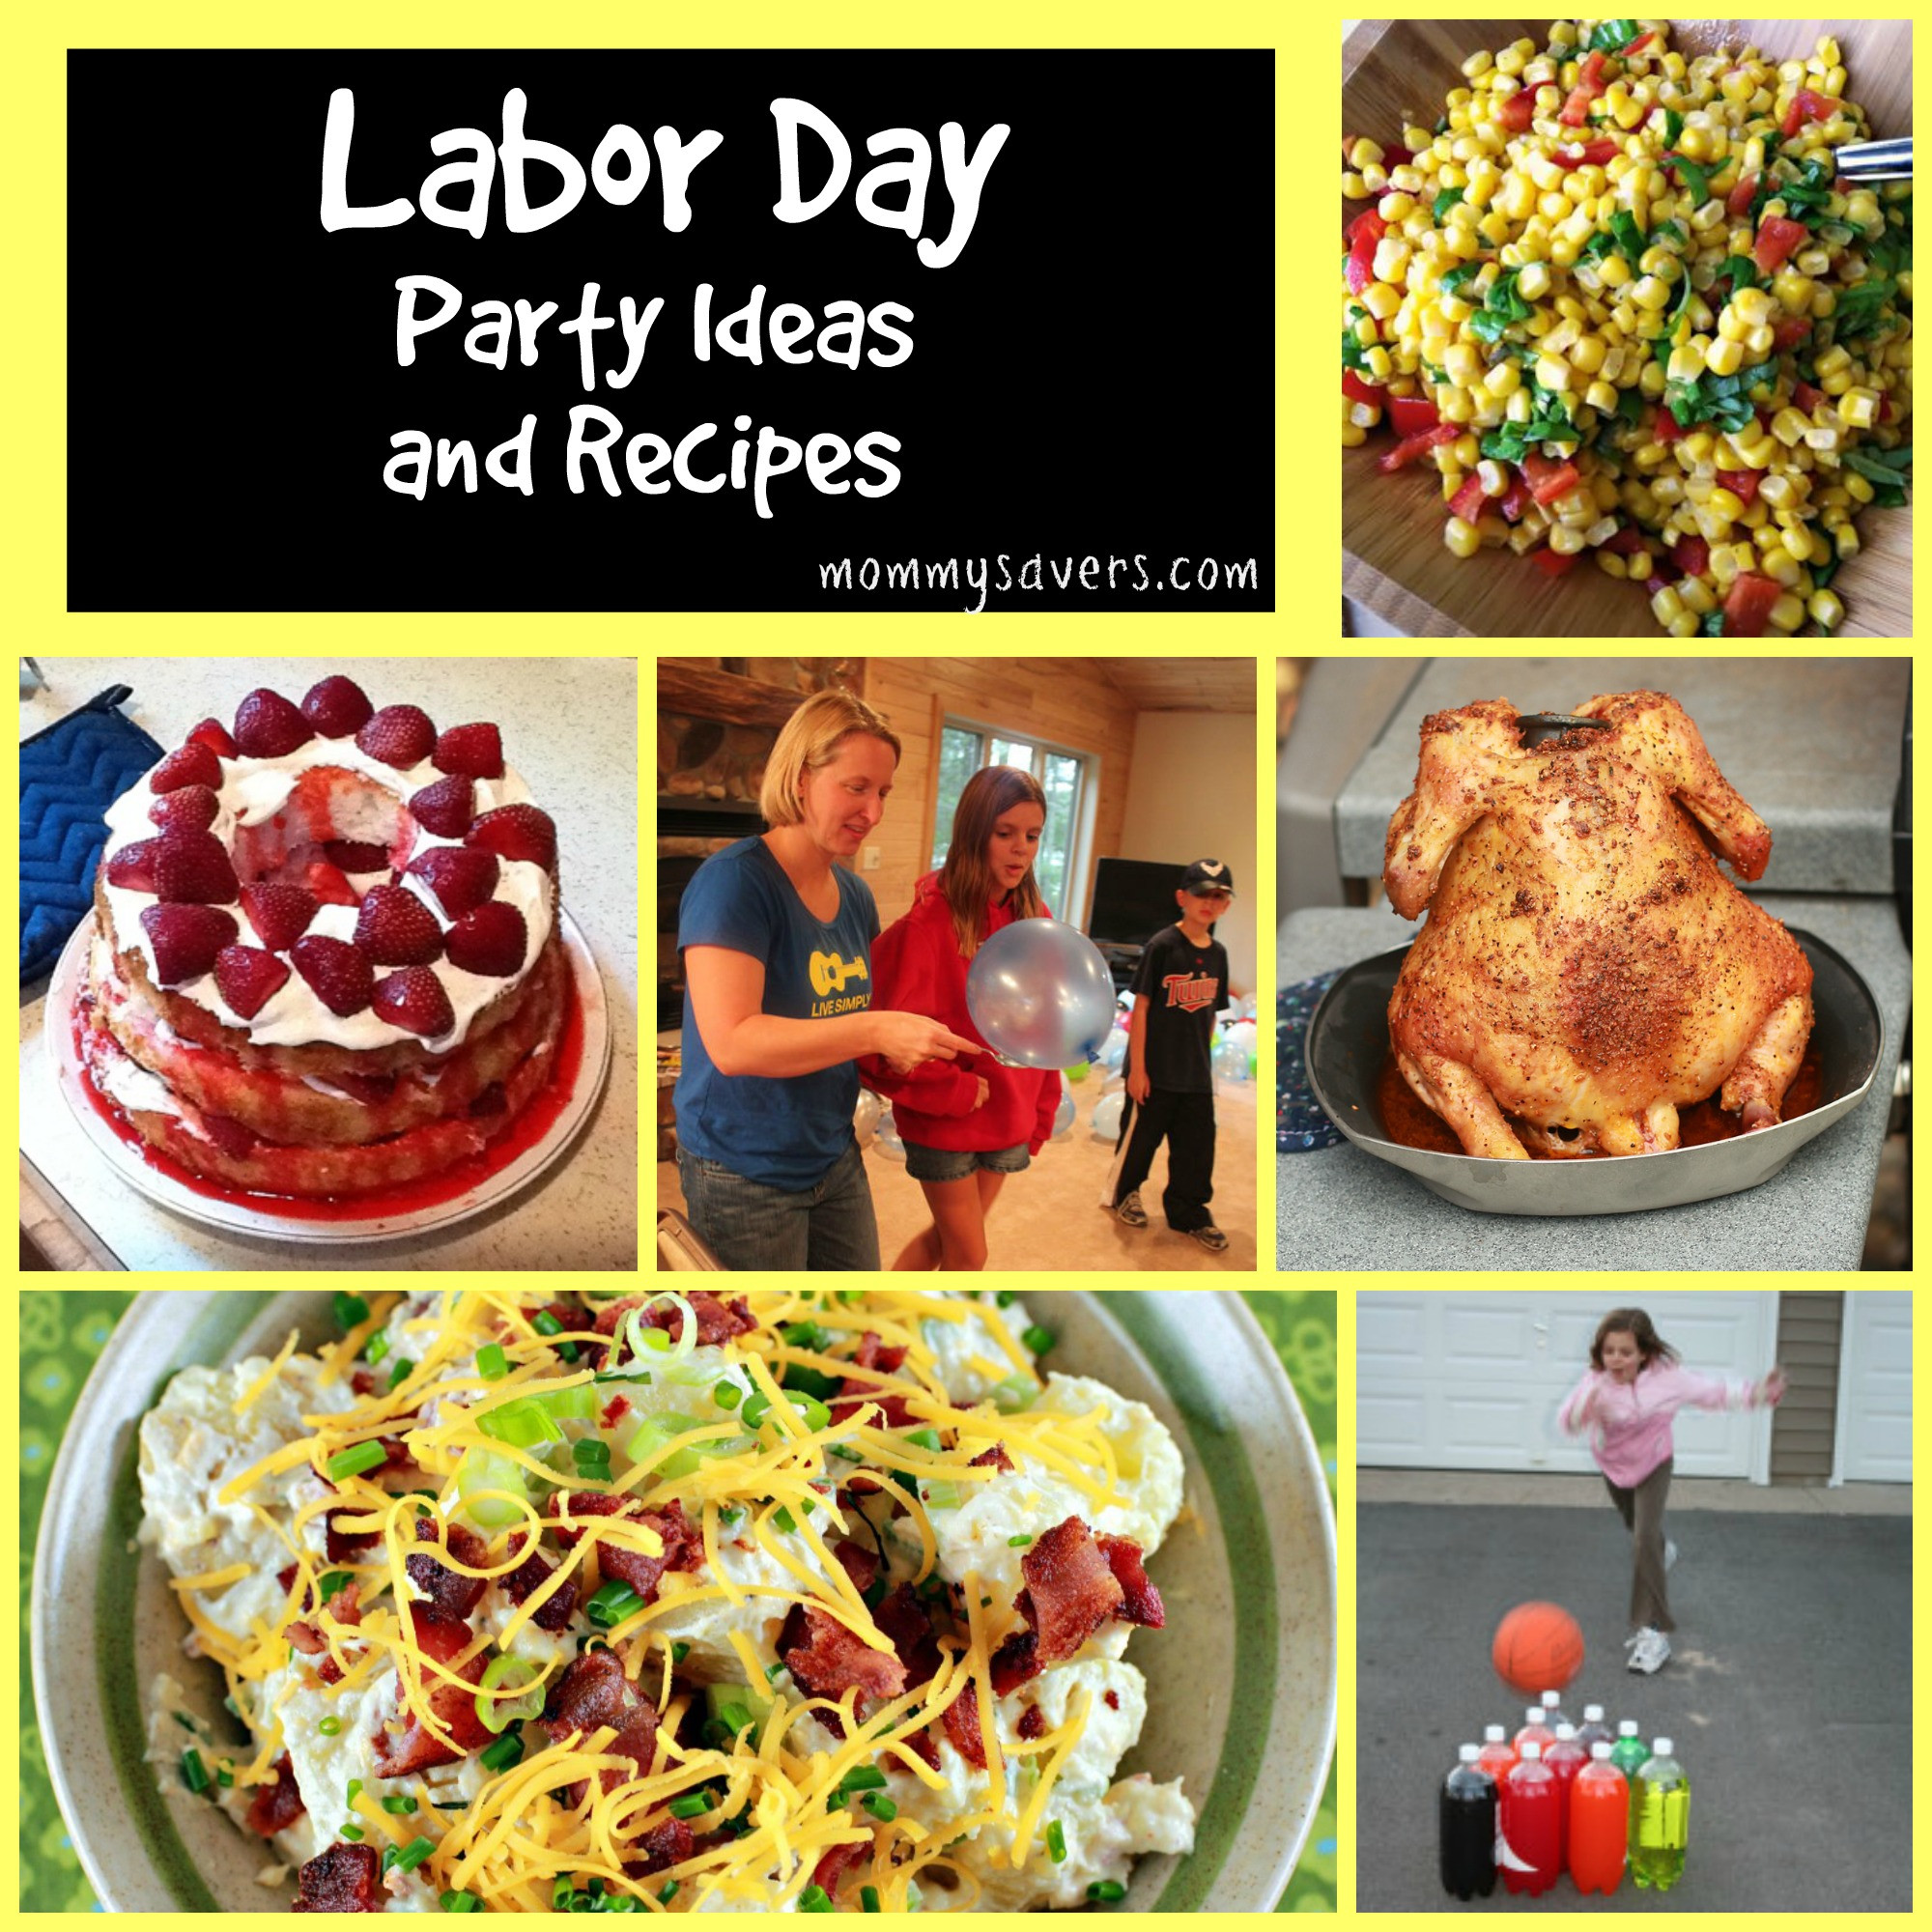 Labor Day Meal Ideas
 Labor Day Party Ideas and 25 Recipes Mommysavers